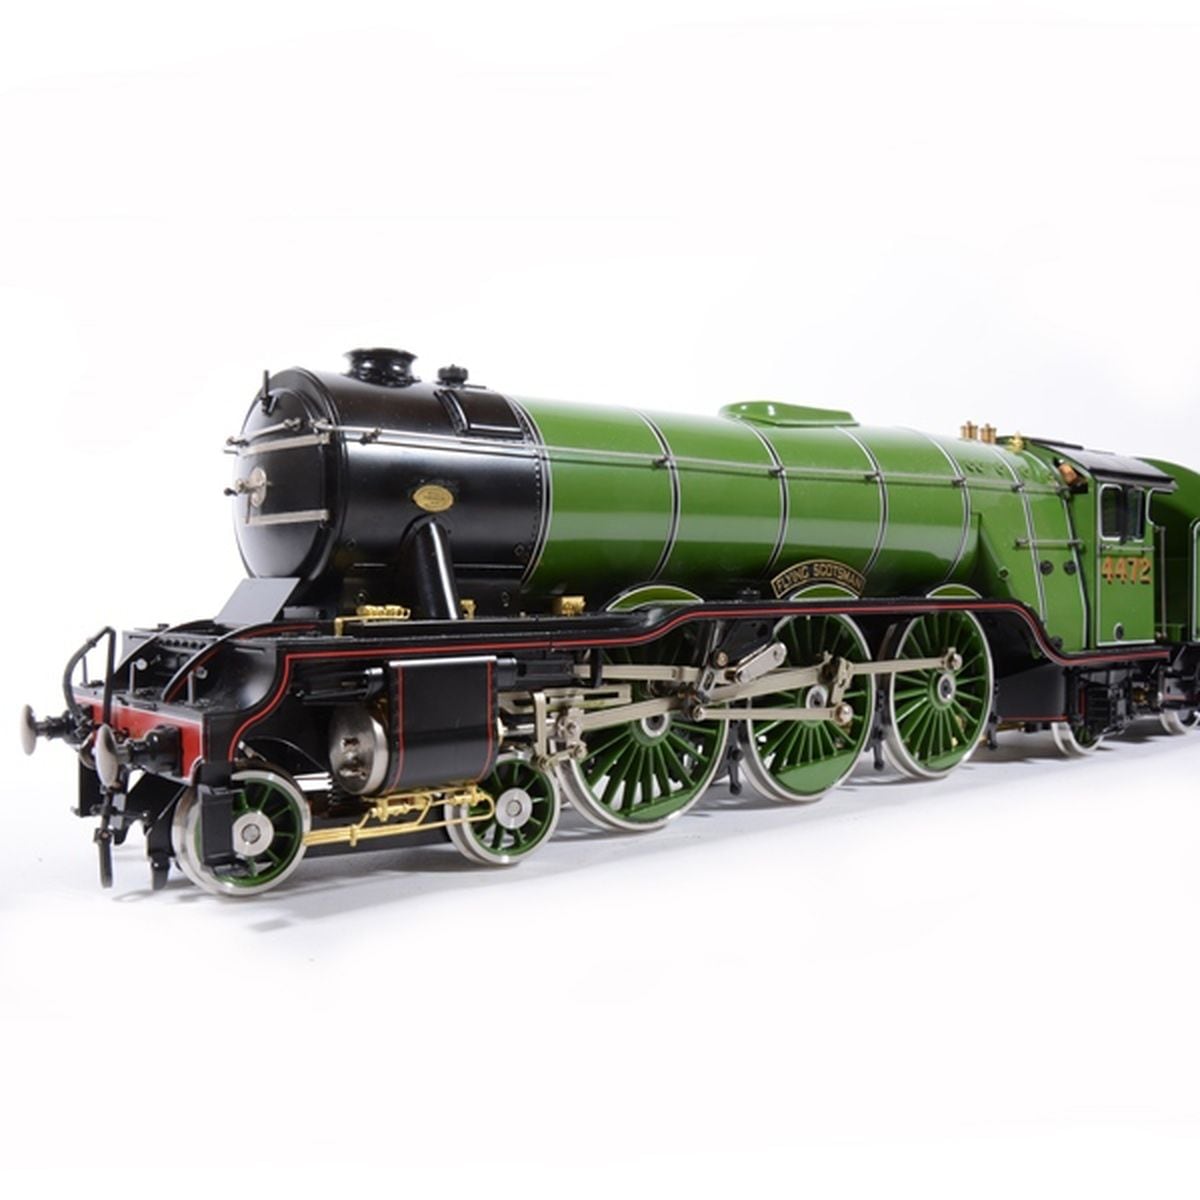 A model of the Flying Scotsman